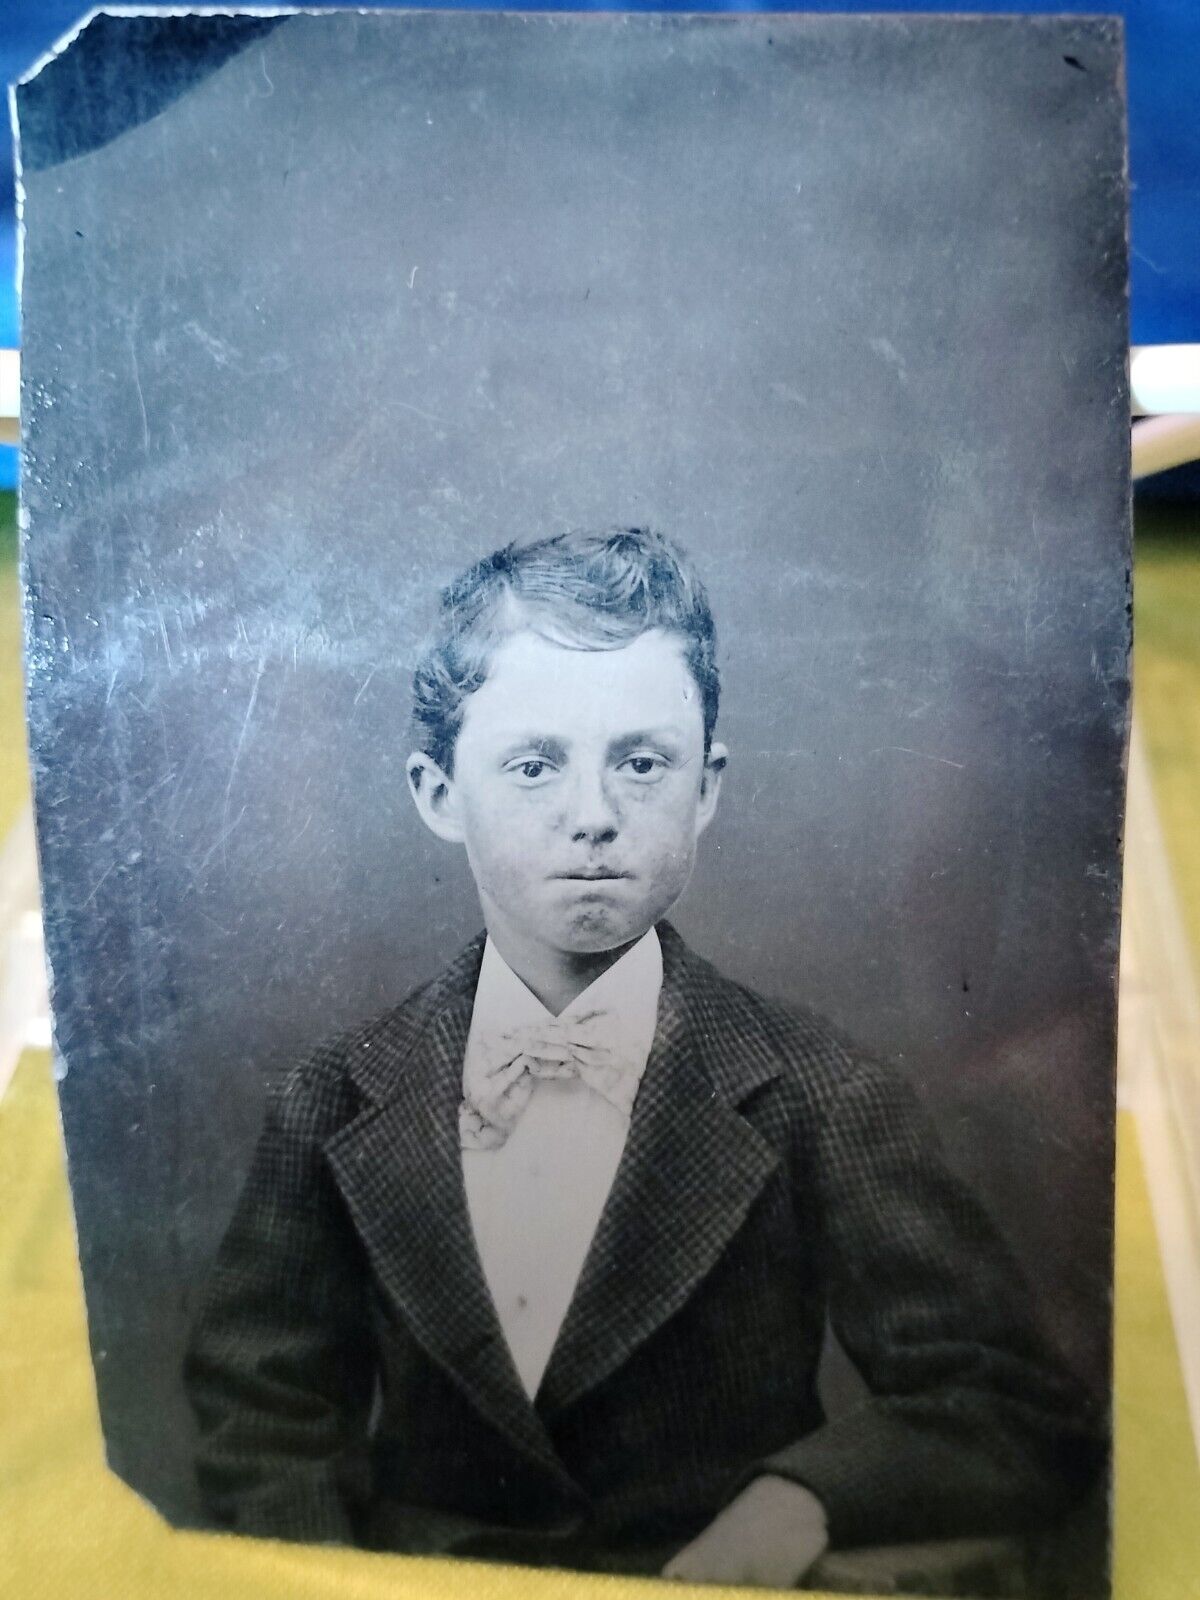 Antique Tin Type Portrait Photograph Young Man Jacket and Bow Tie Good Condition